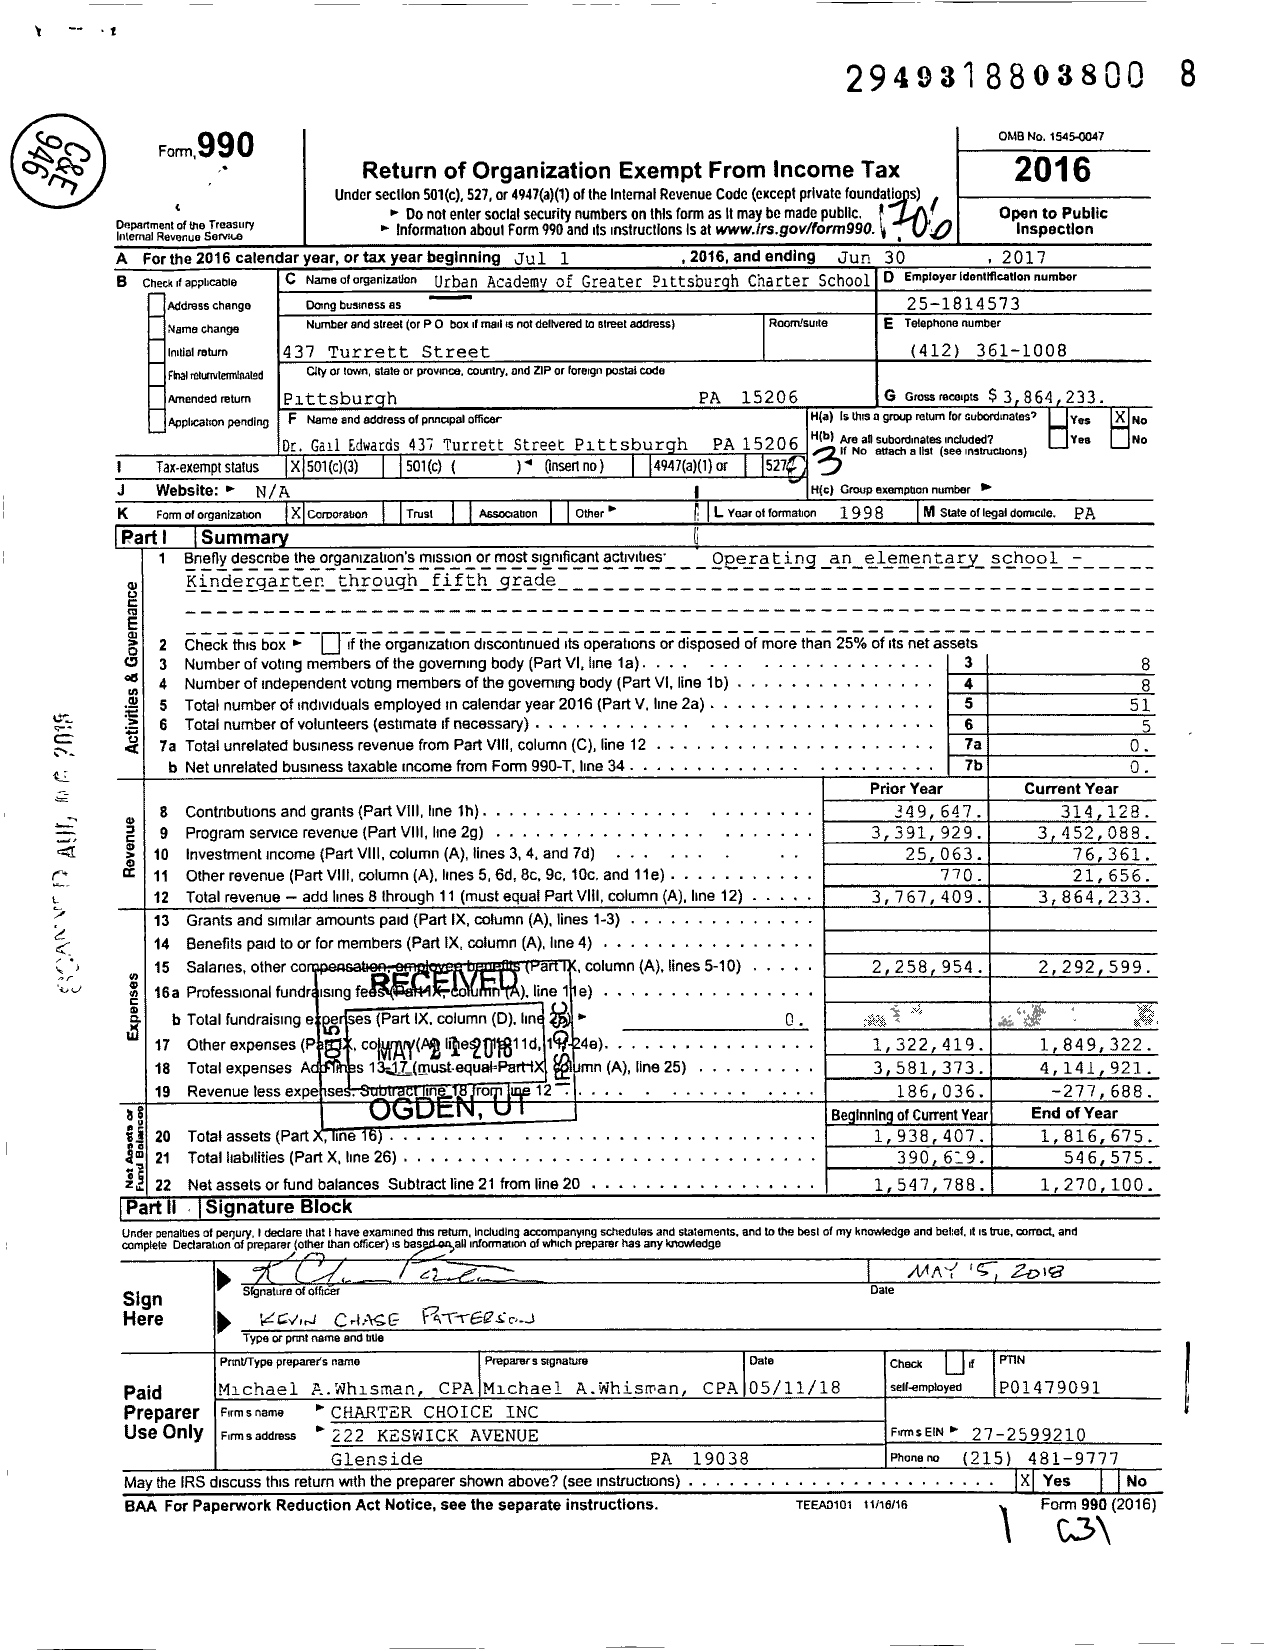 Image of first page of 2016 Form 990 for Urban Academy of Greater Pittsburgh Charter School (UAGPCS)